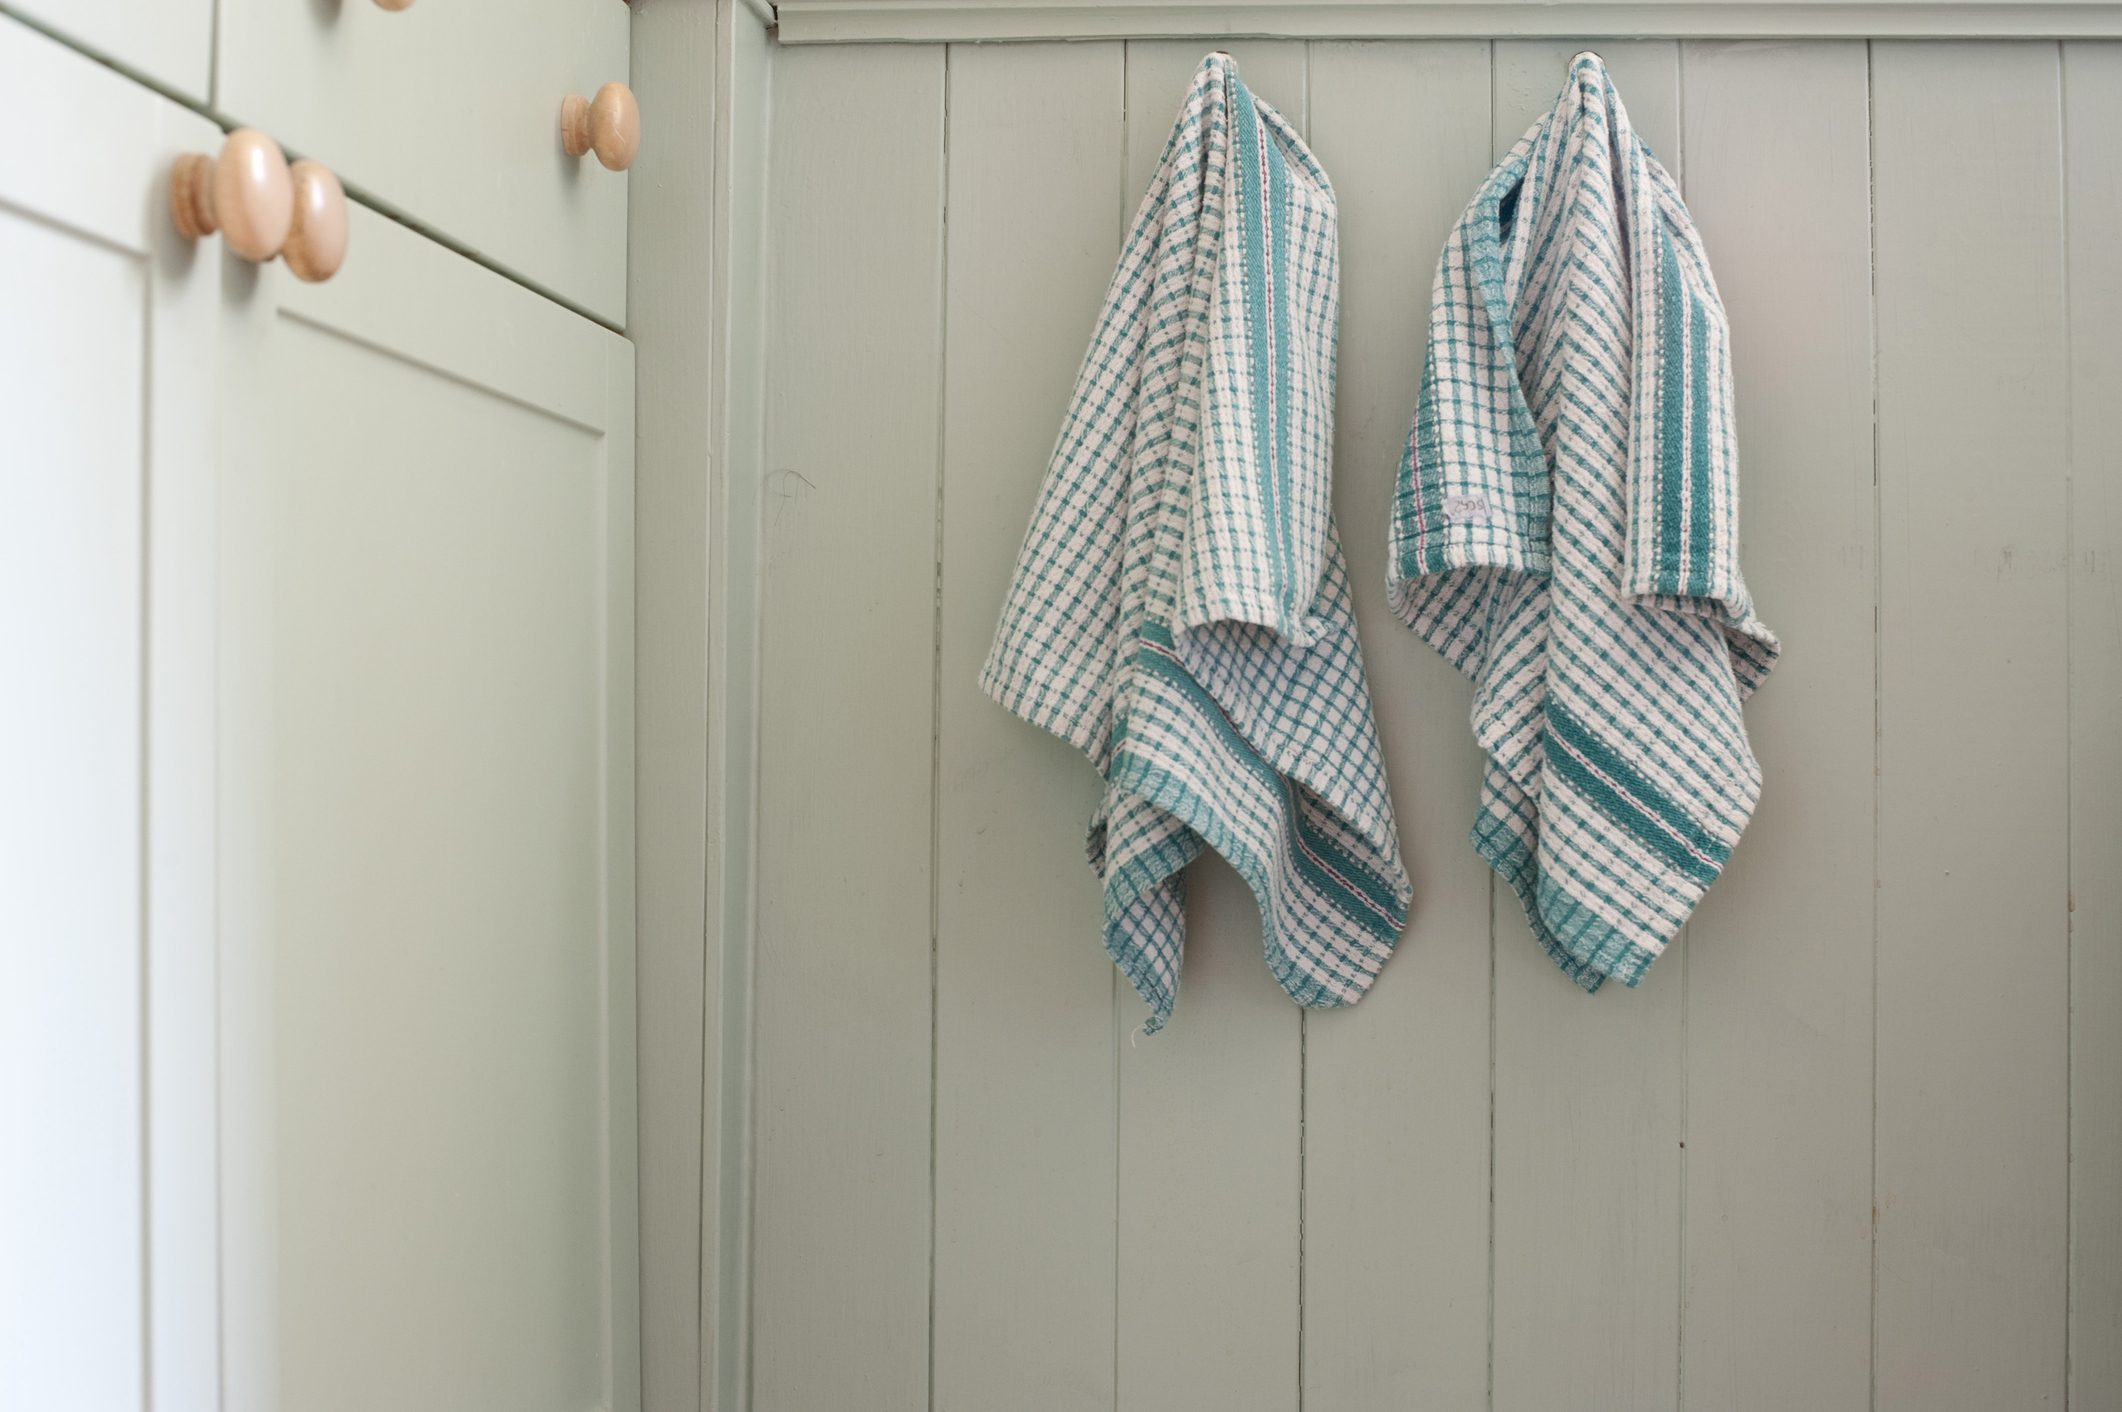 Dish Towels Hanging On Wooden Wall In Kitchen At Home